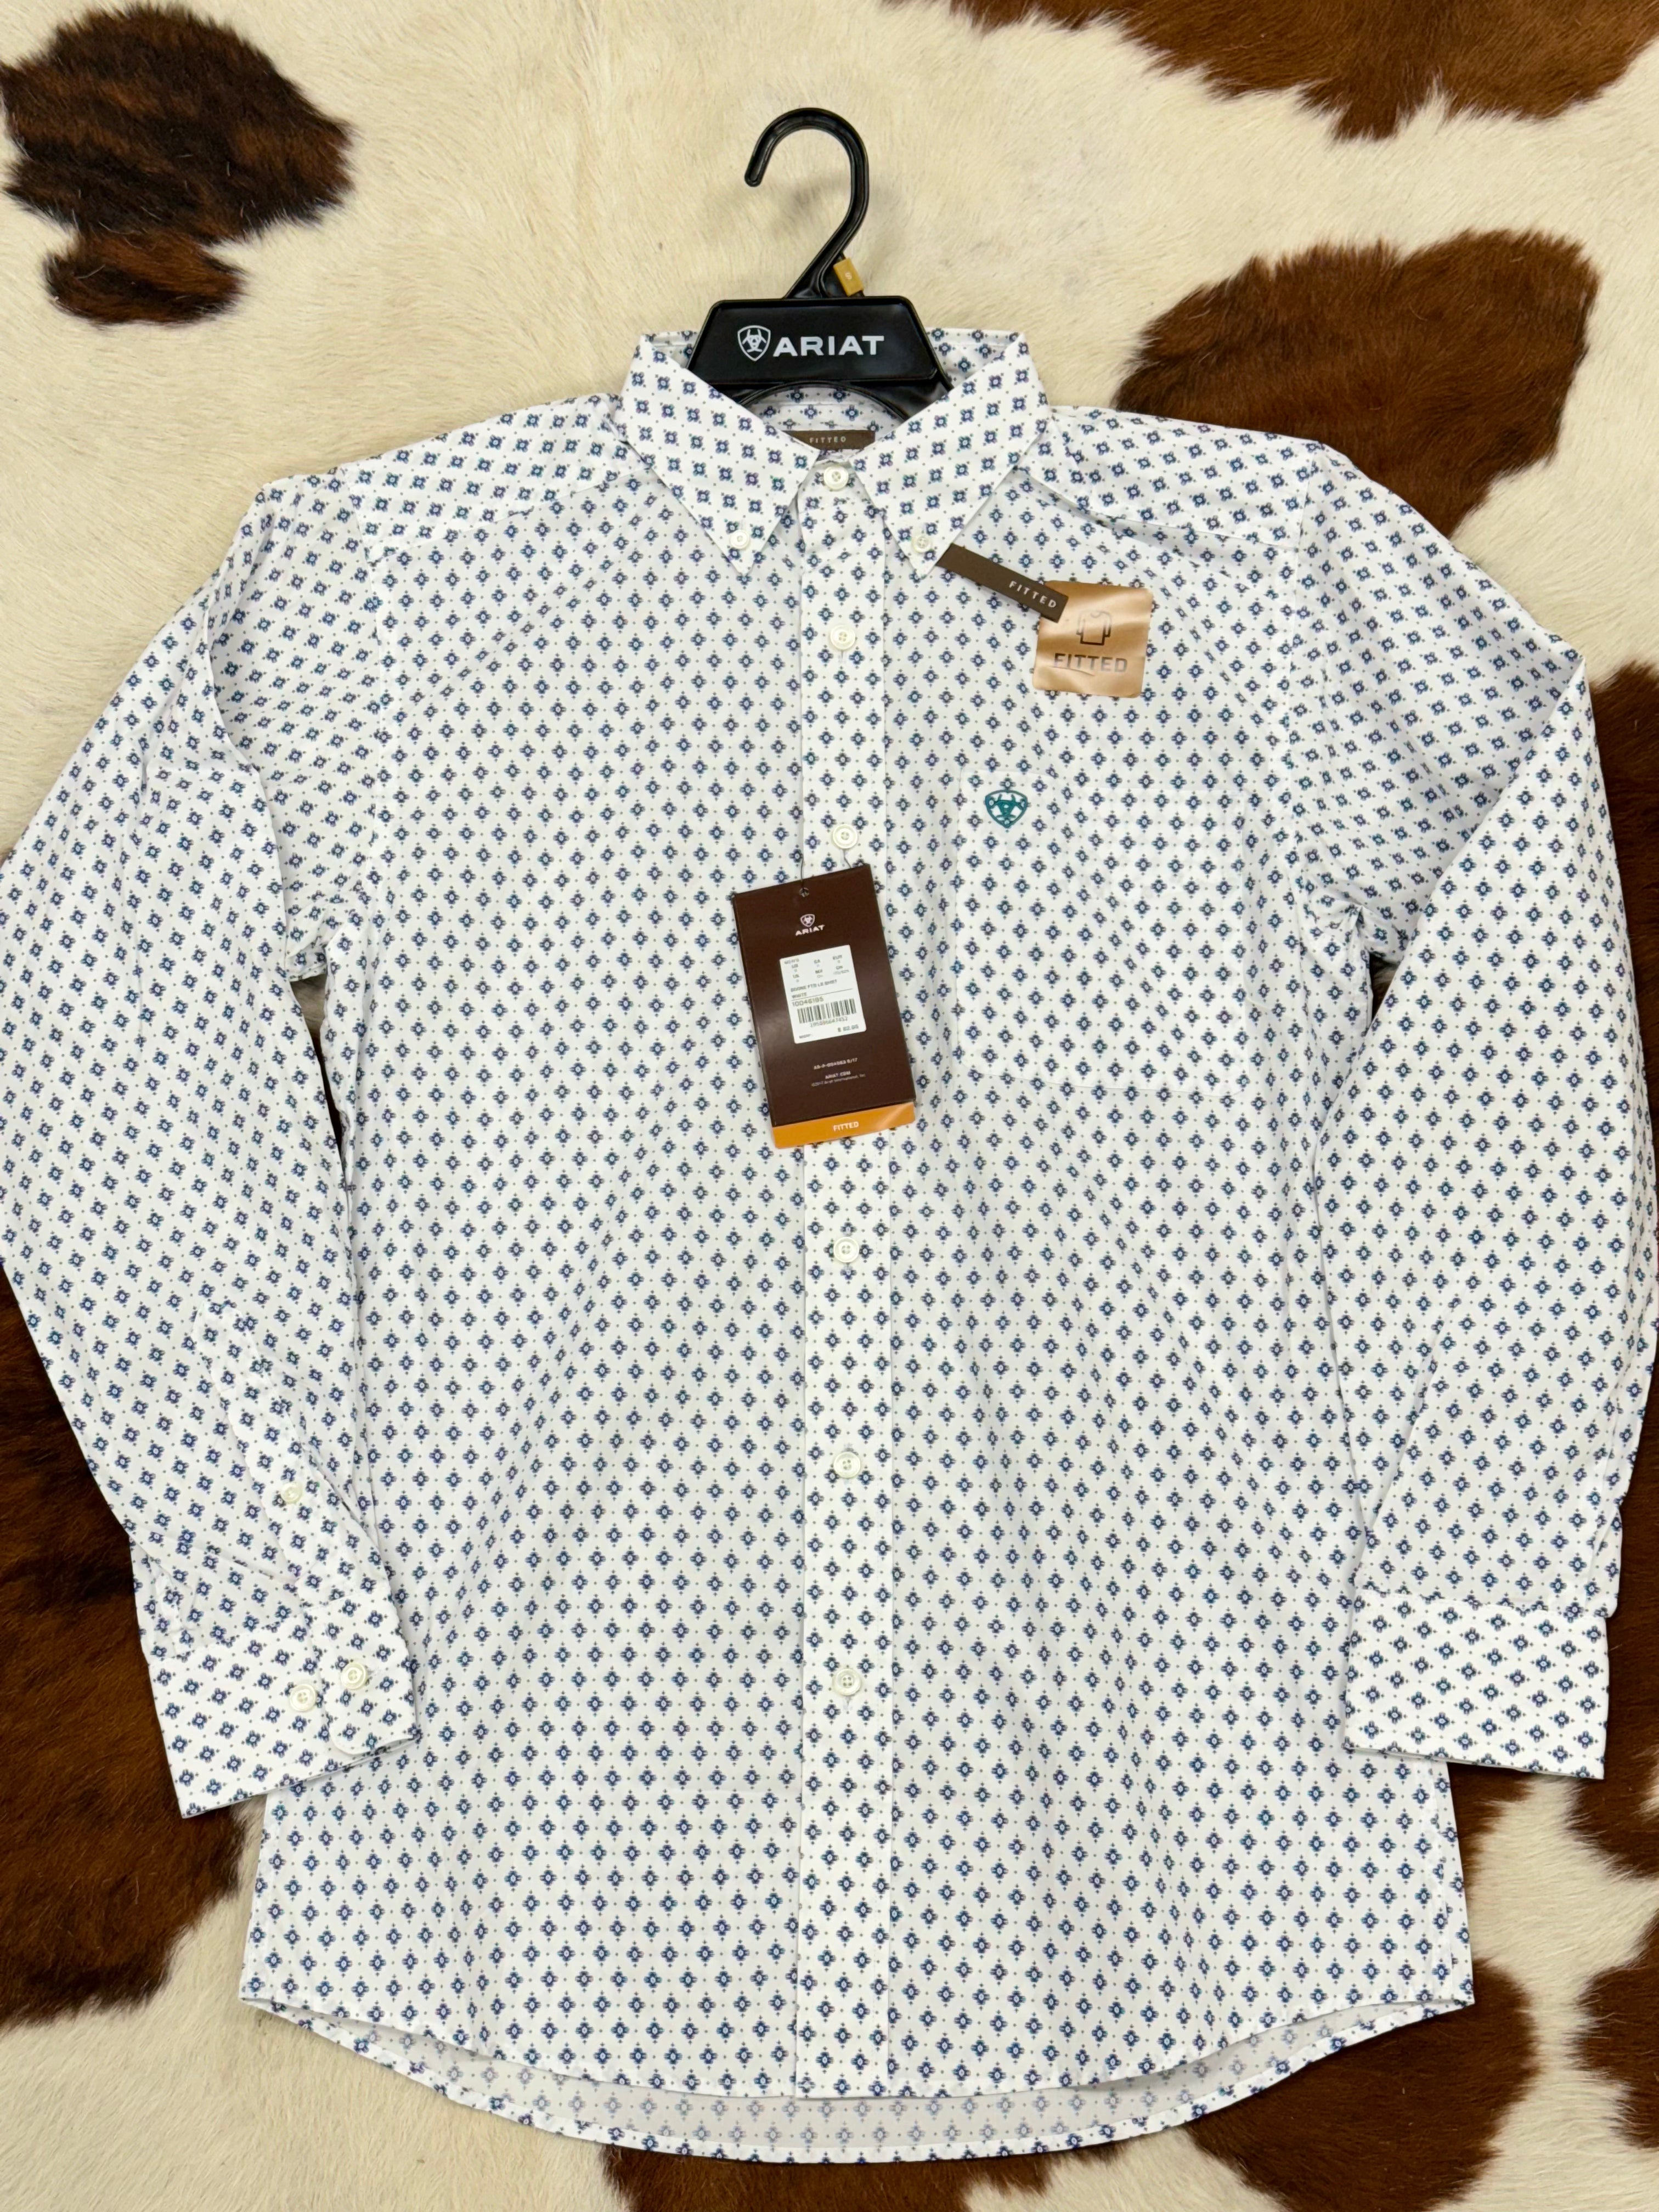 Ariat Shirt Fitted Booned White